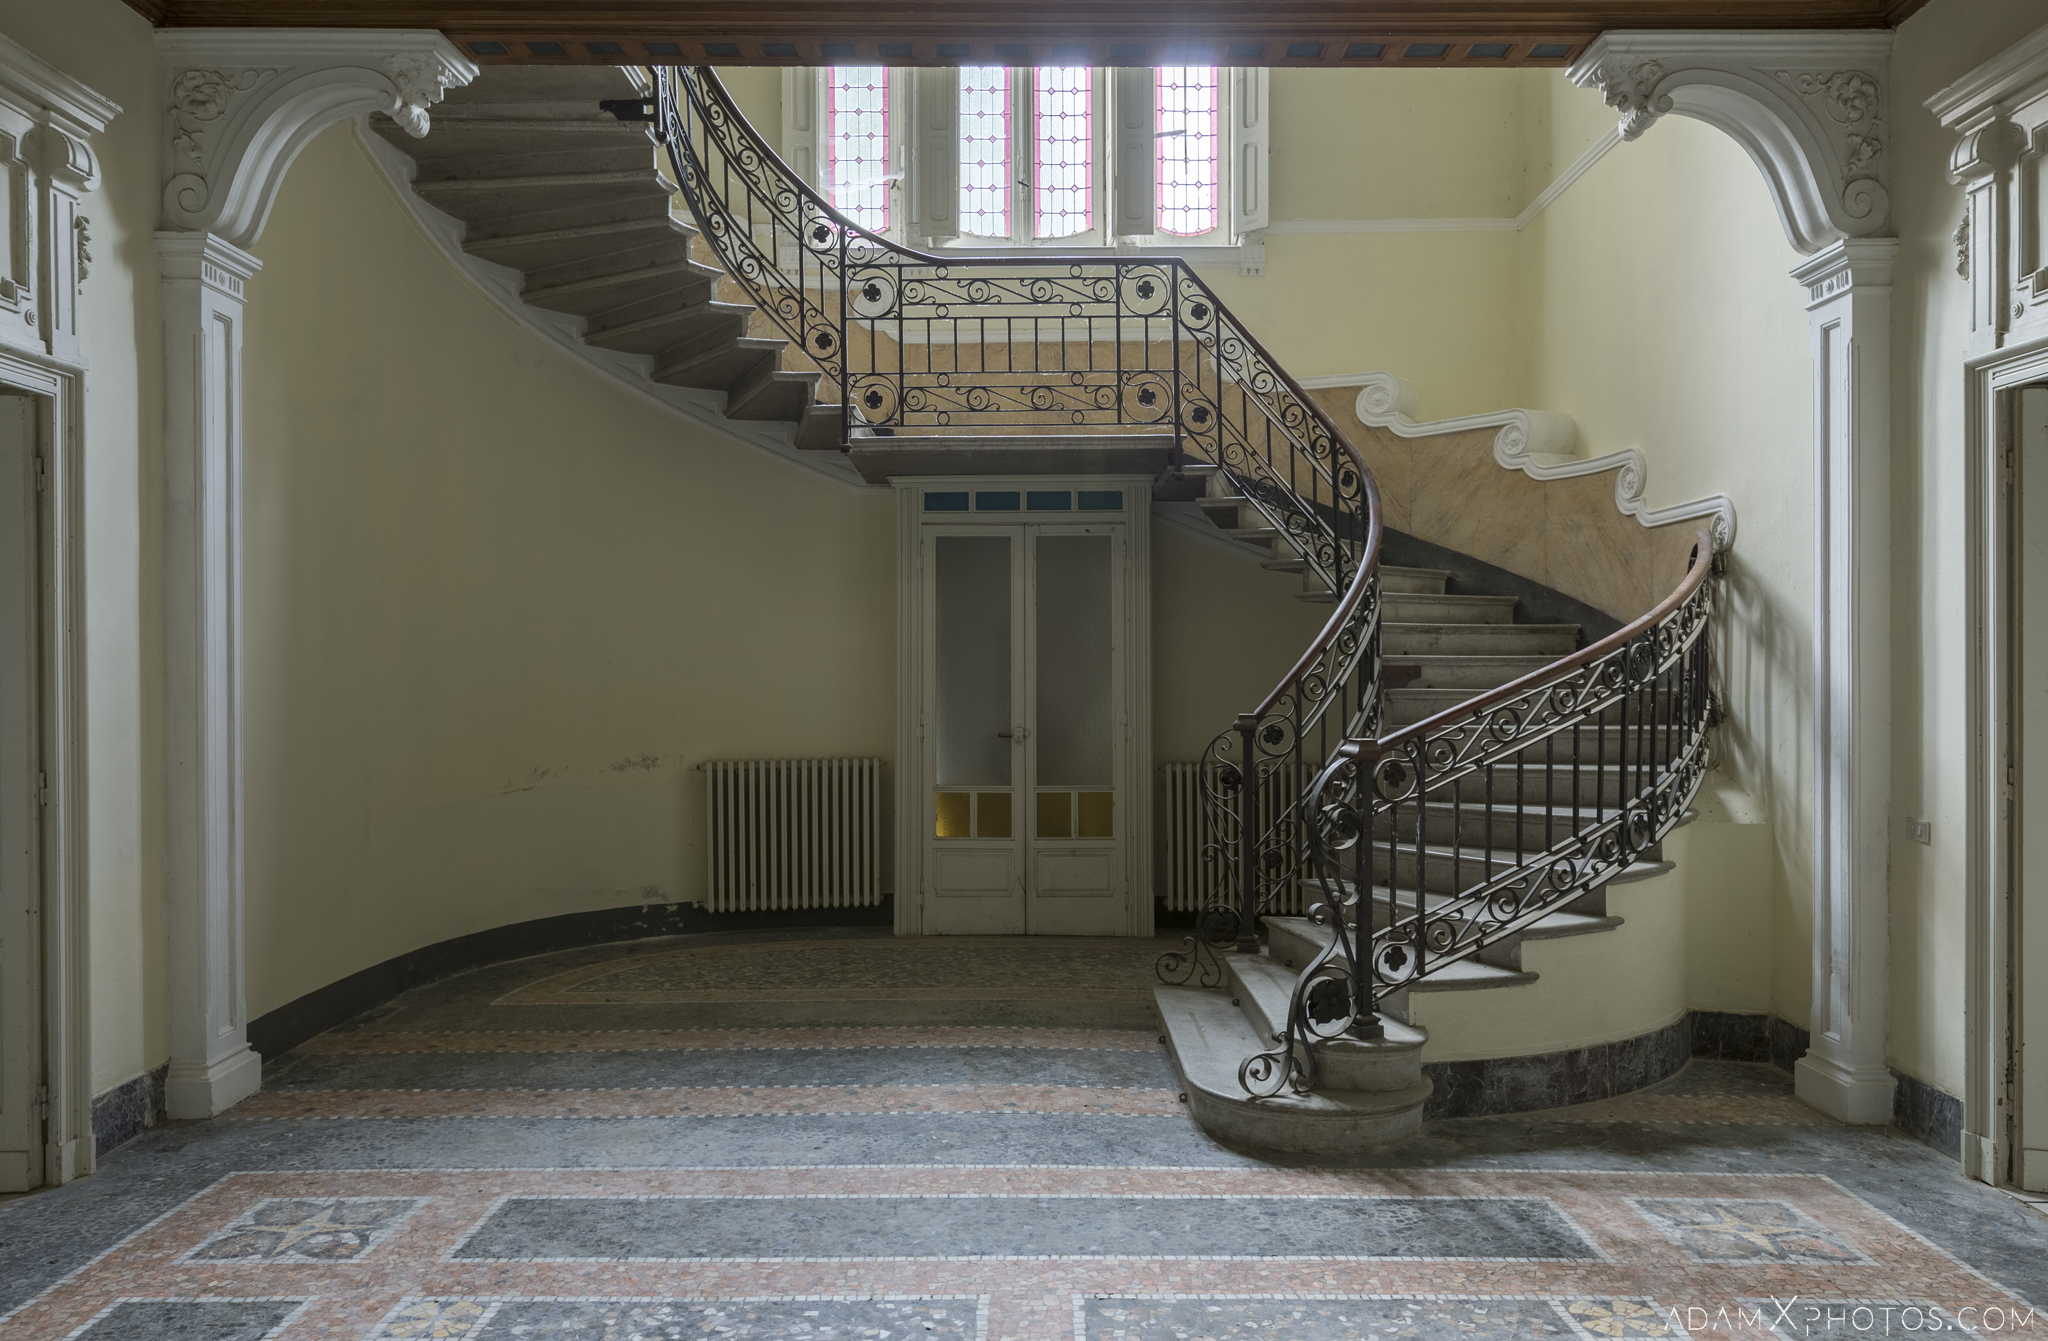 Hallway entrance grand stairs staircase ornate ceiling tiles tiled floor Villa Margherita Night Camping Urbex Adam X Urban Exploration Italy Italia Access 2016 Abandoned decay lost forgotten derelict location creepy haunting eerie